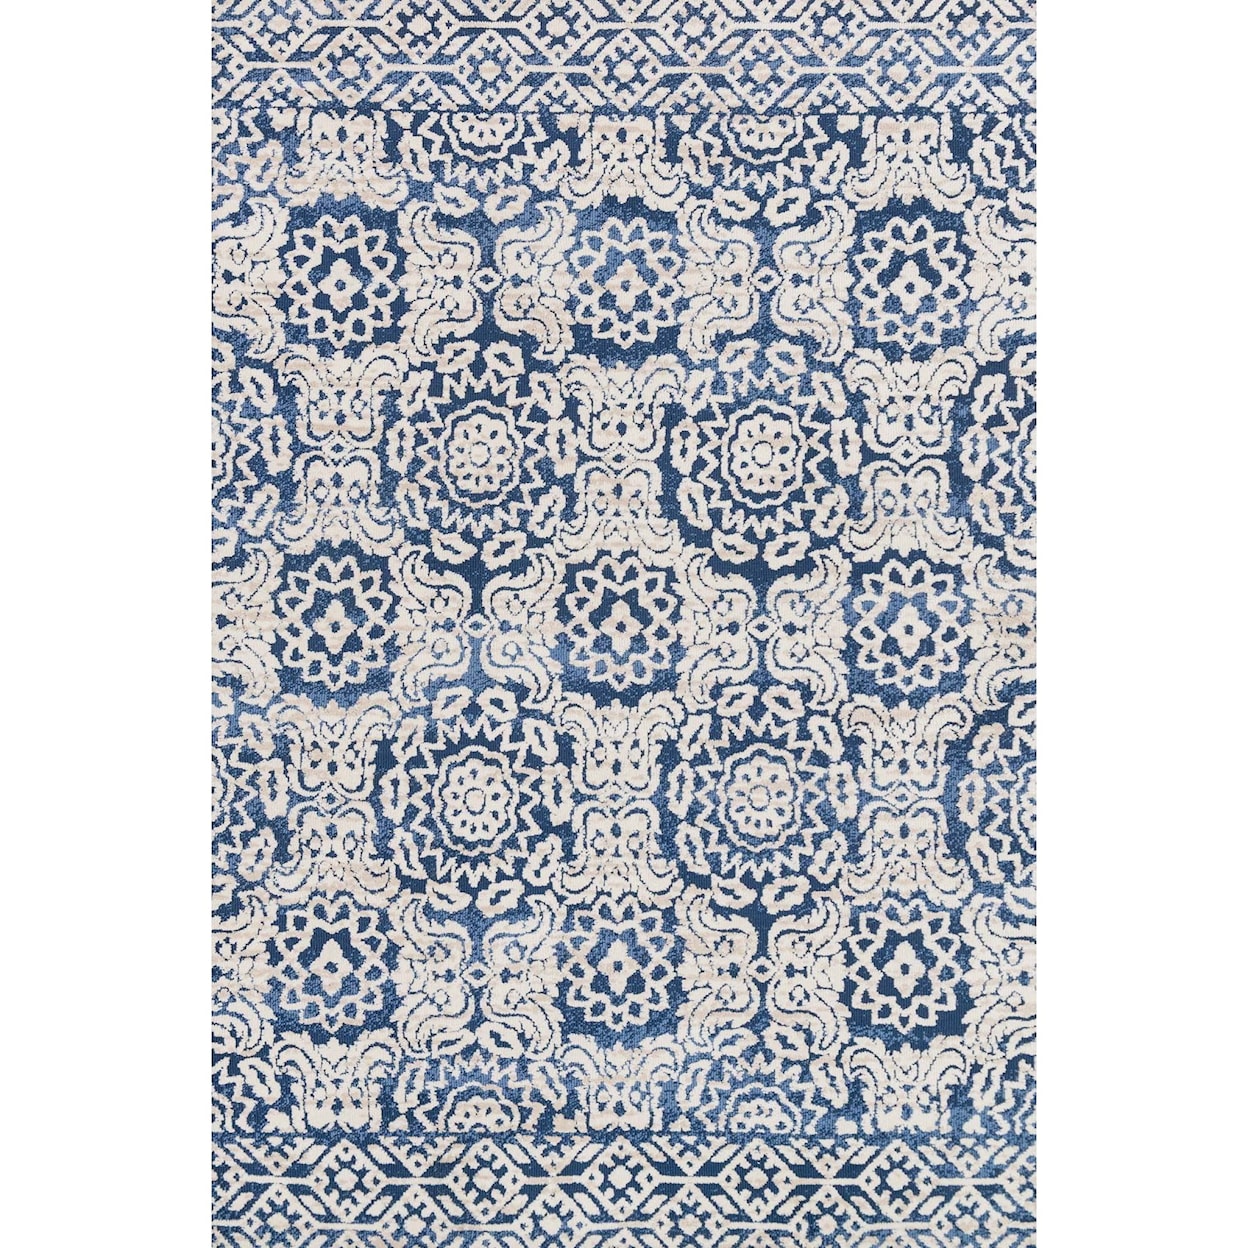 Magnolia Home by Joanna Gaines for Loloi Lotus 7' 9" x 9' 9" Rectangle Rug